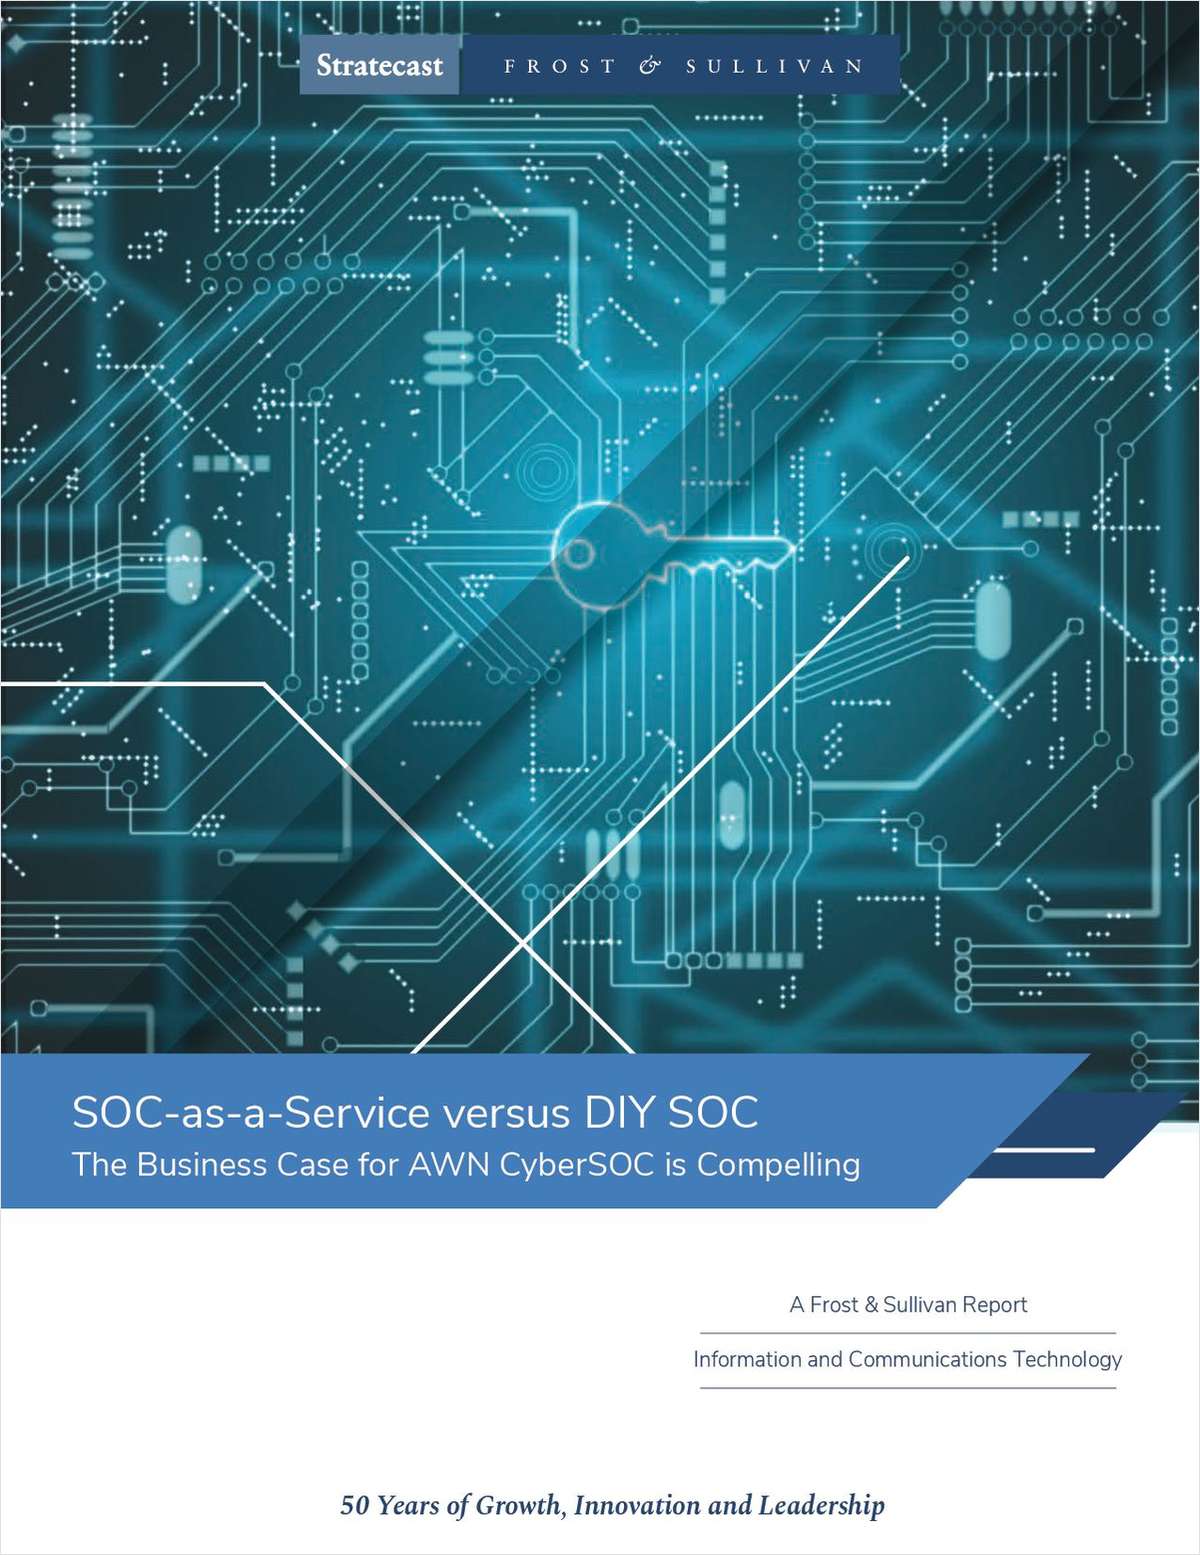 Frost & Sullivan Makes the Case for Arctic Wolf's SOC-as-a-Service over DIY SOC